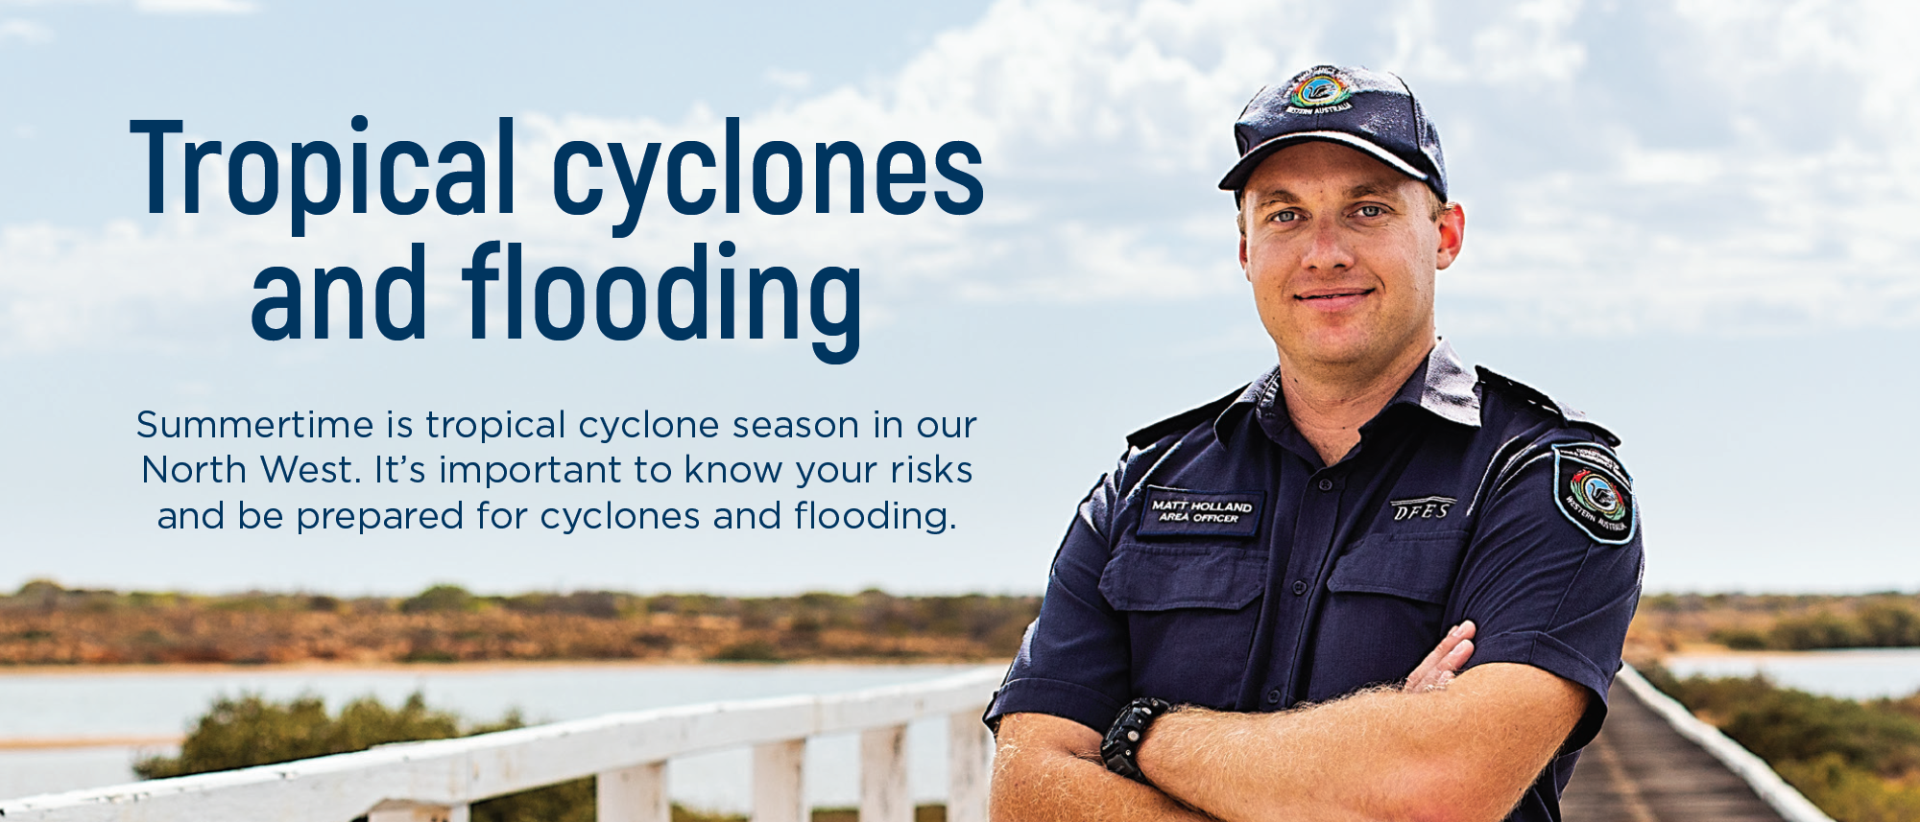 Be the calm before the storm this cyclone season